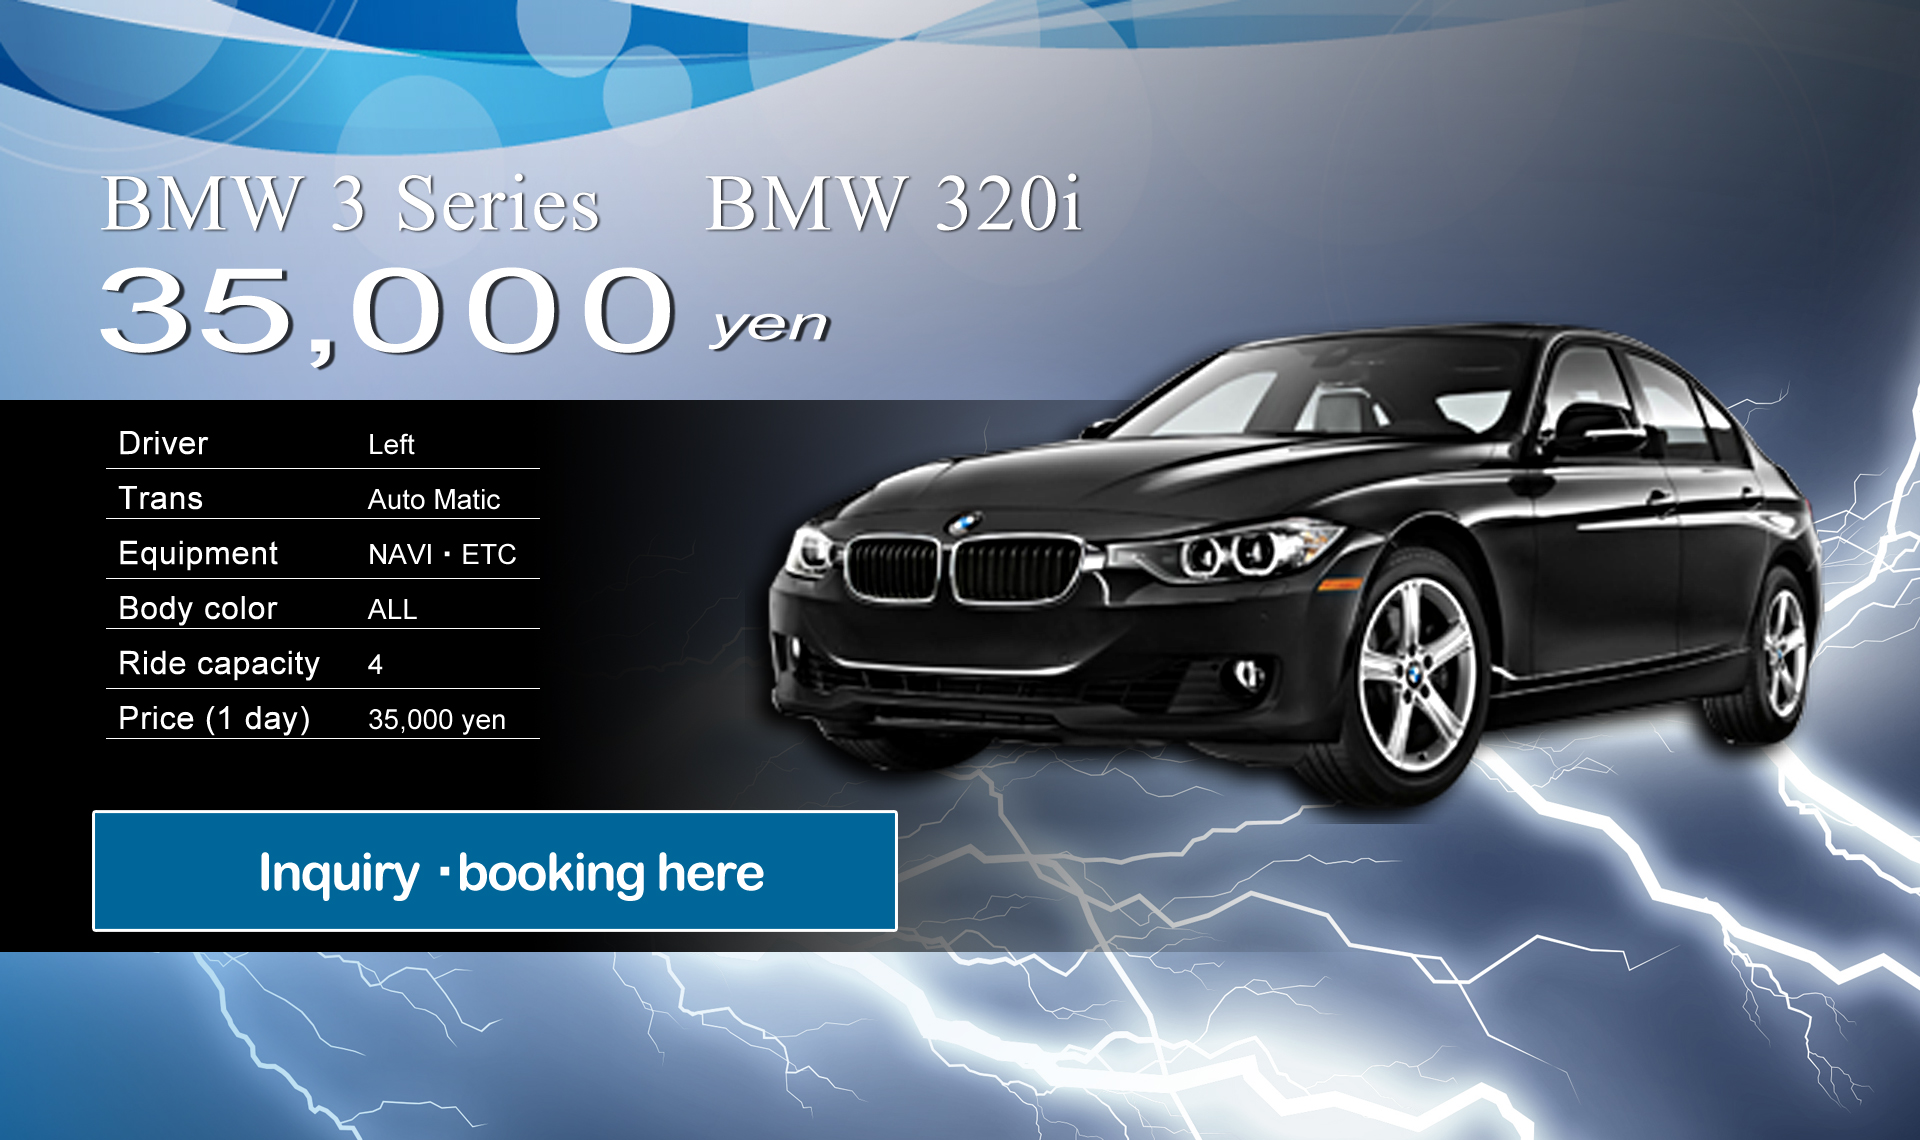 BMW 320i Inquiry　booking here